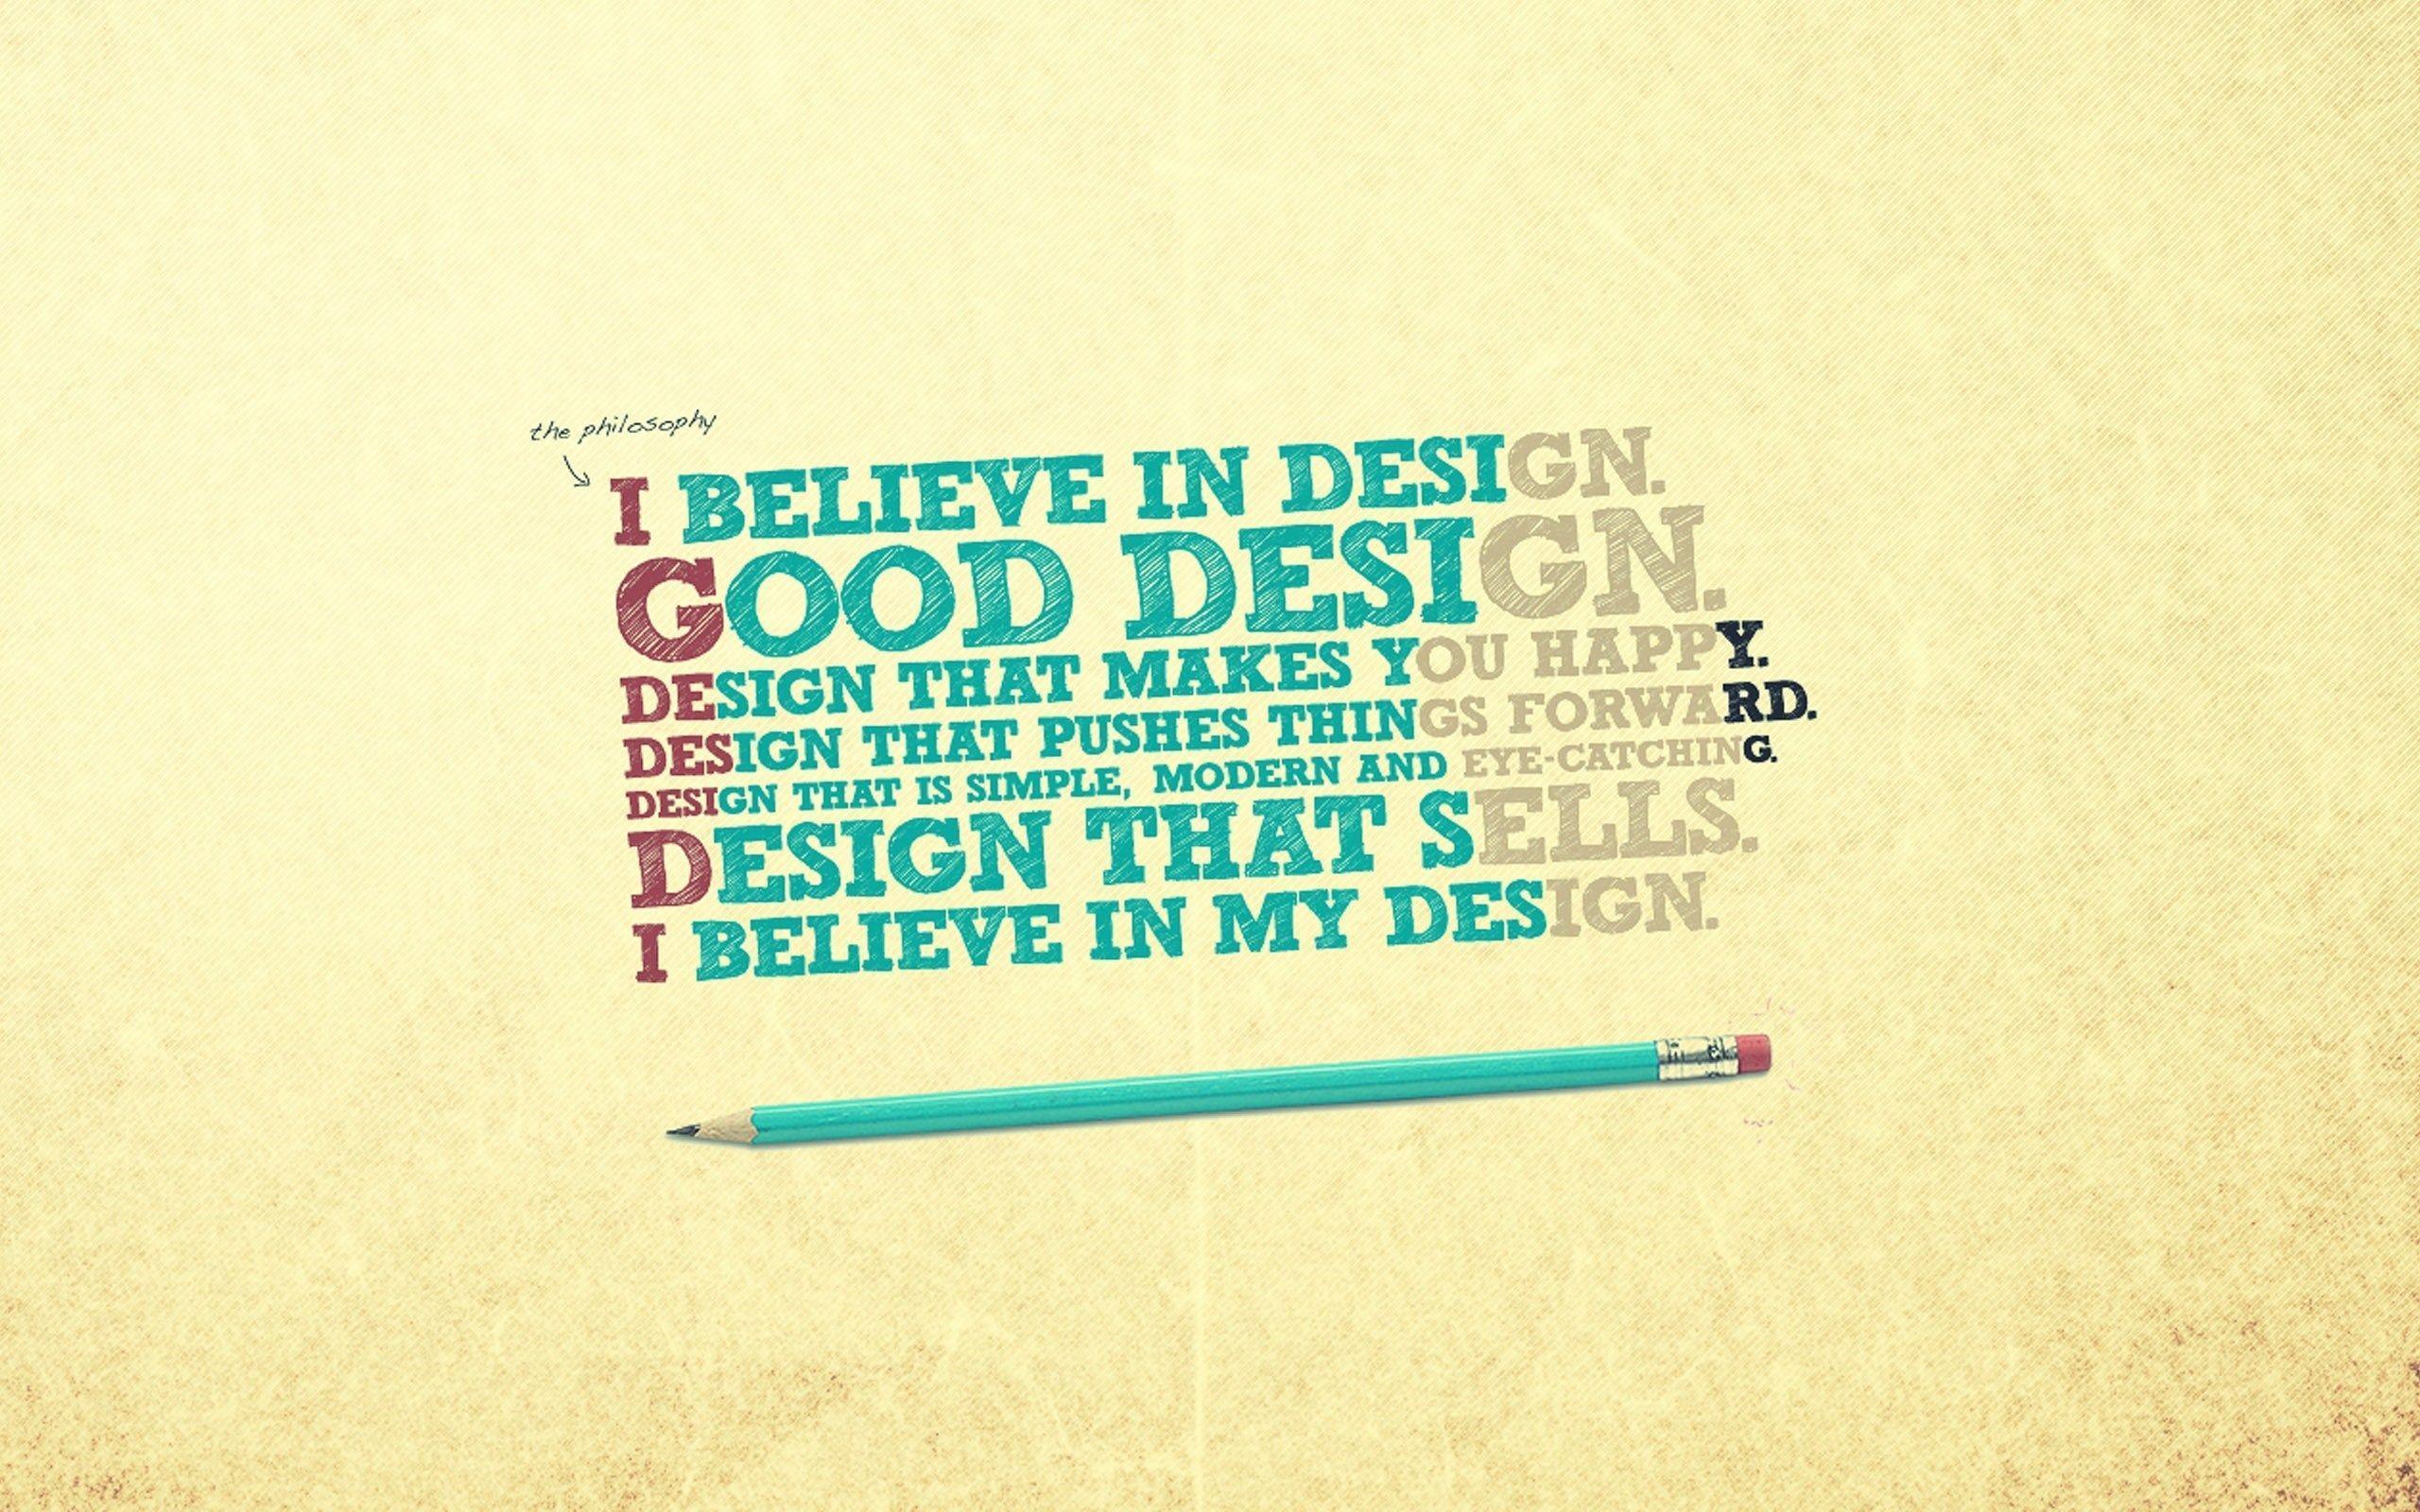 graphic design, typography font, hd, wallpaper, pencil, quote